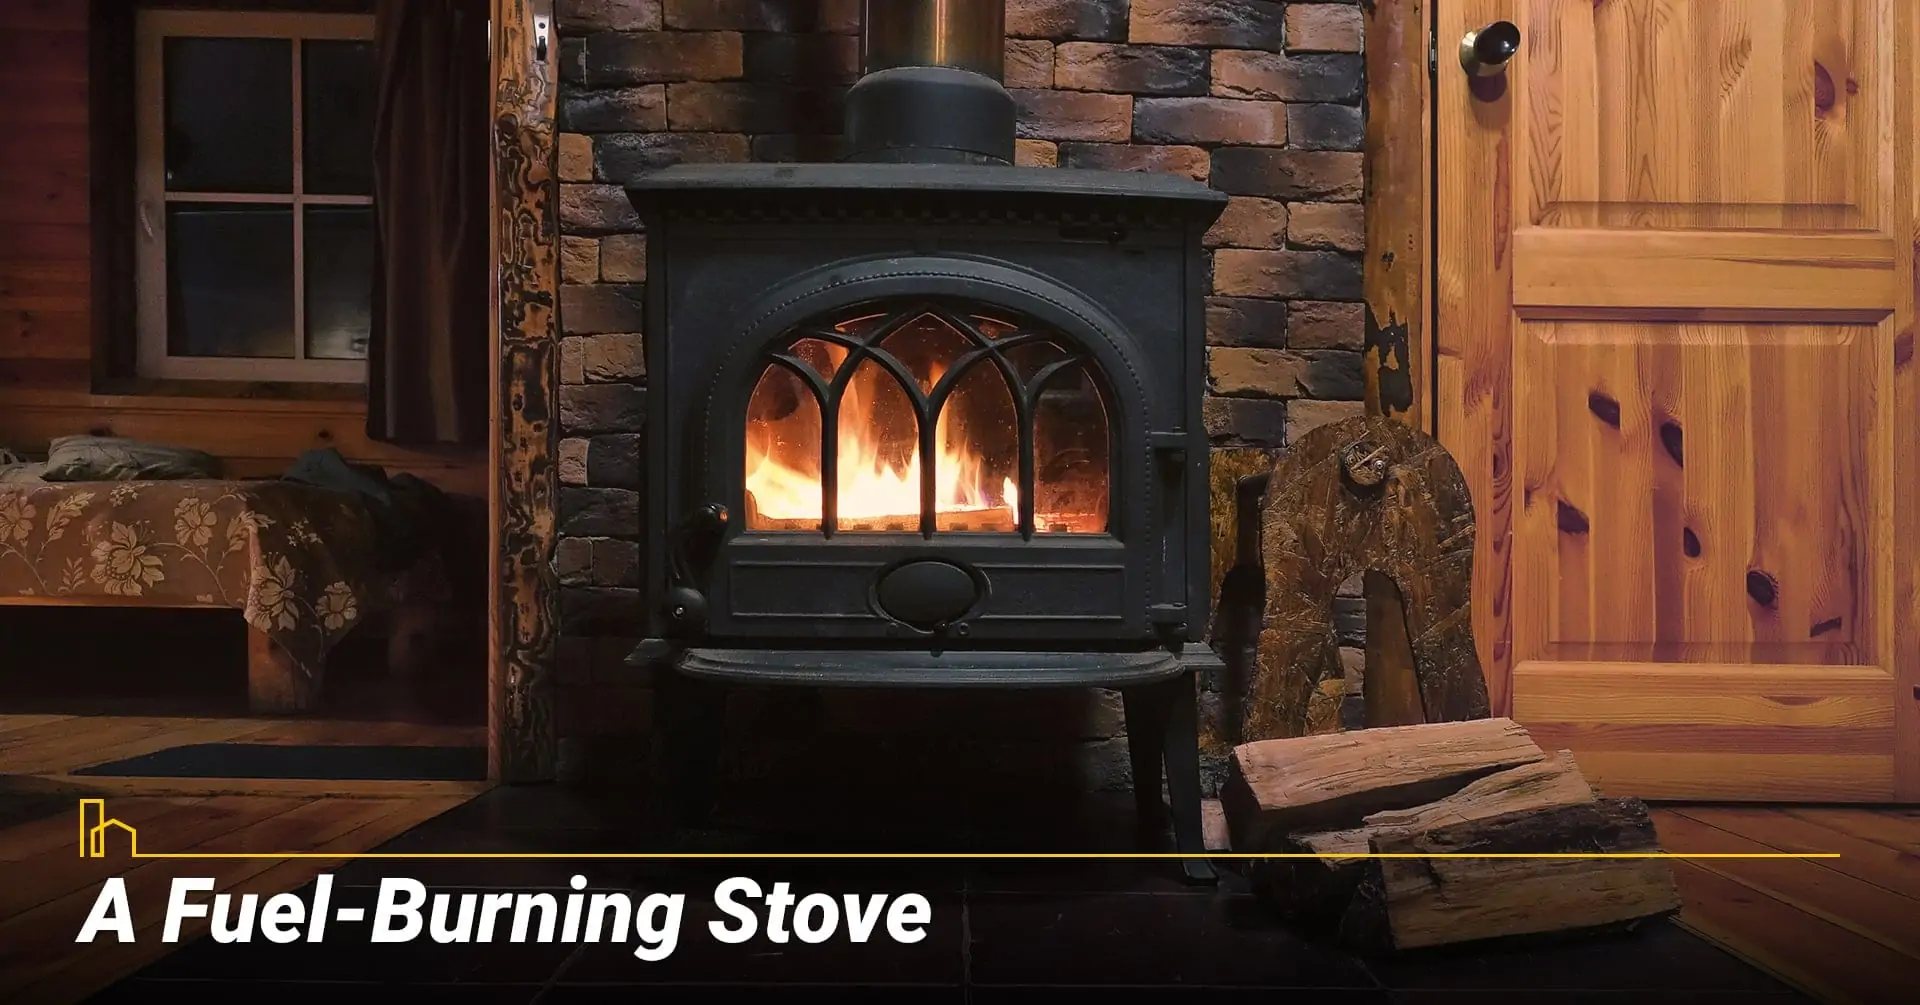 A Fuel-Burning Stove, heat your home with wood-burning stove